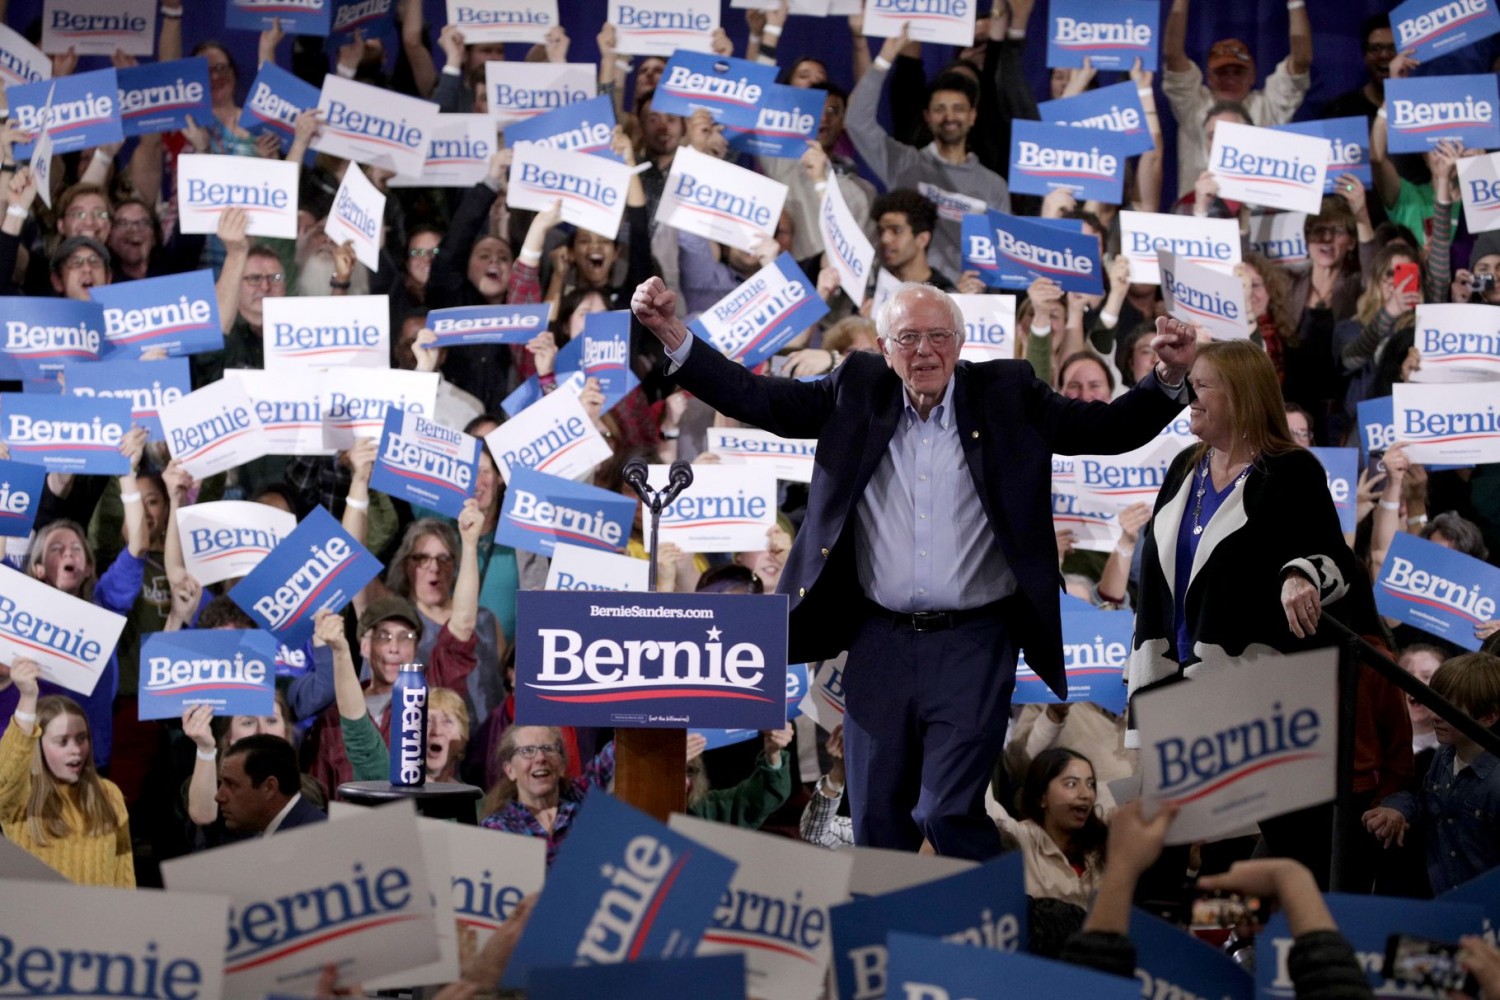 Bernie Sanders greets supporters at a Super Tuesday event in Vermont on March 3, 2020. Alex Wong/Getty Images